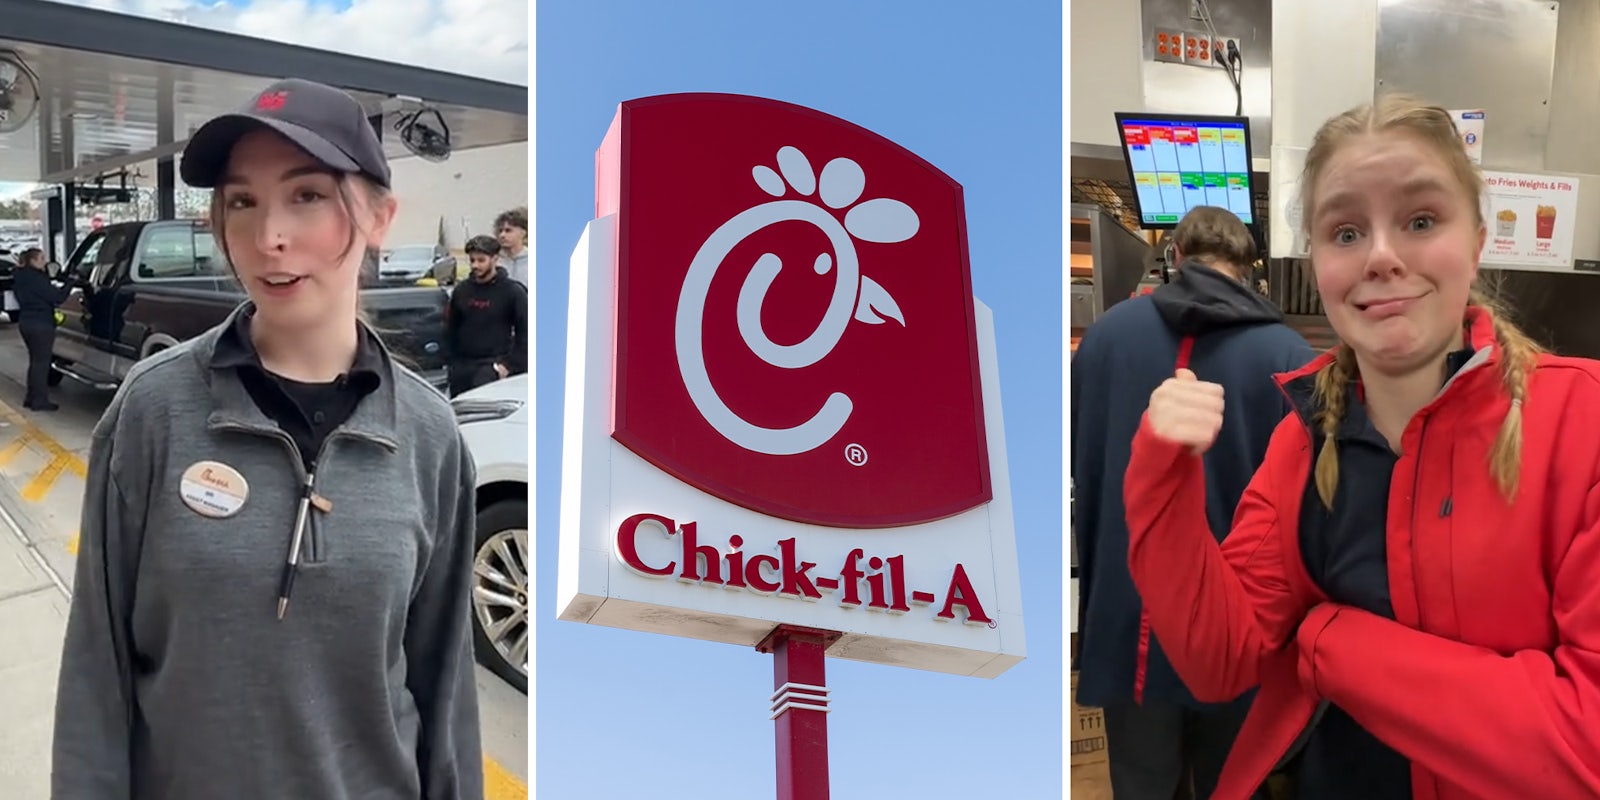 Chick-fil-A workers say they get $8.75 for shift meals. It doesn’t even cover a full meal